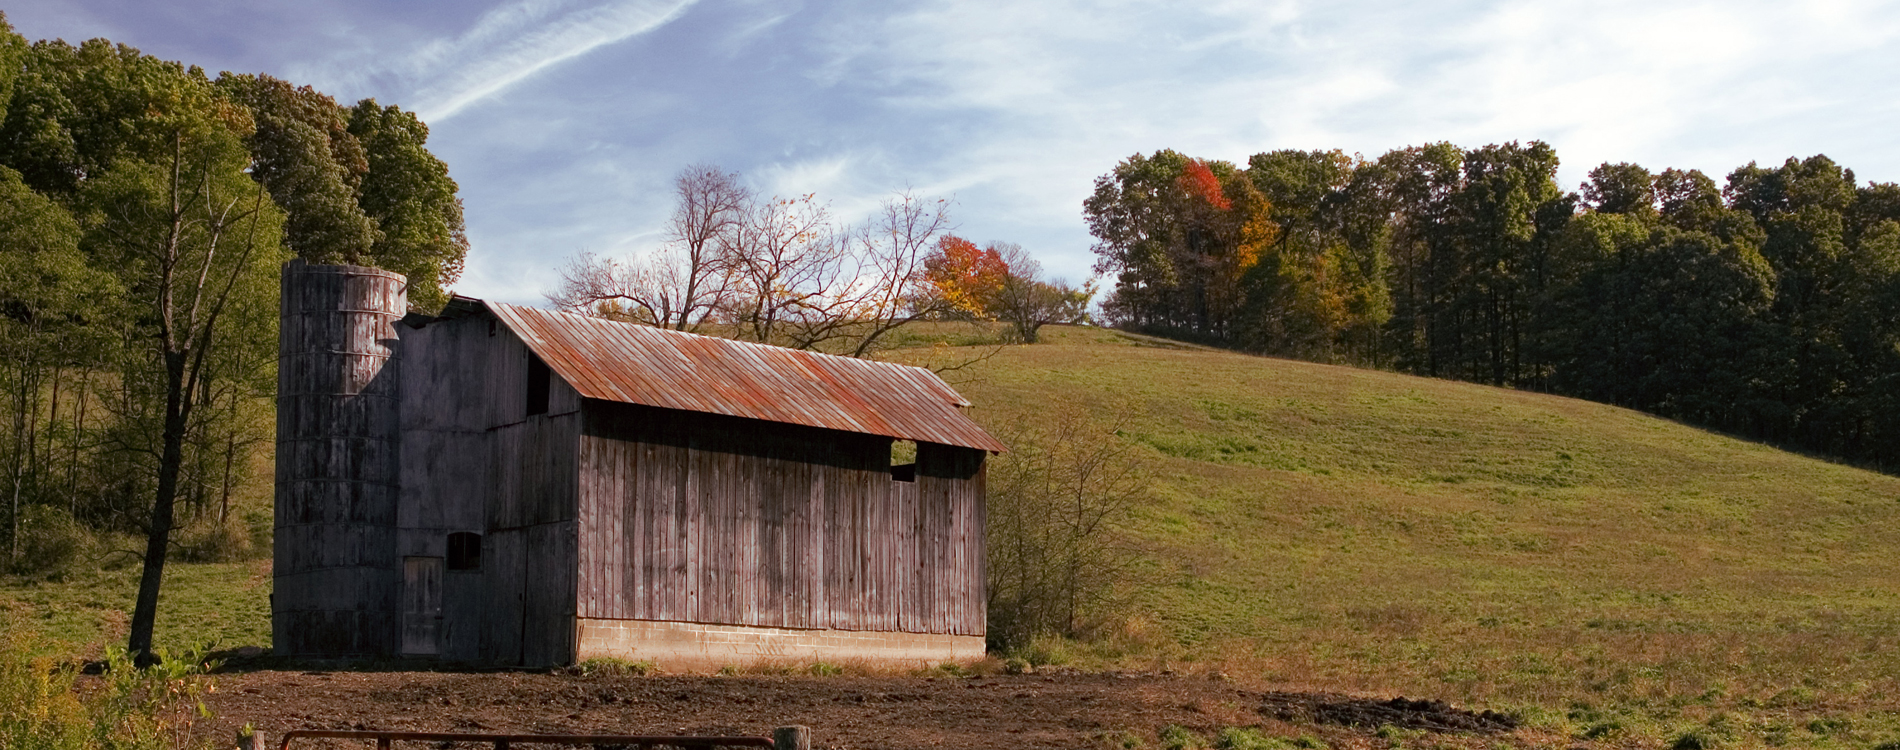 Amish Country, OH - Old Barn